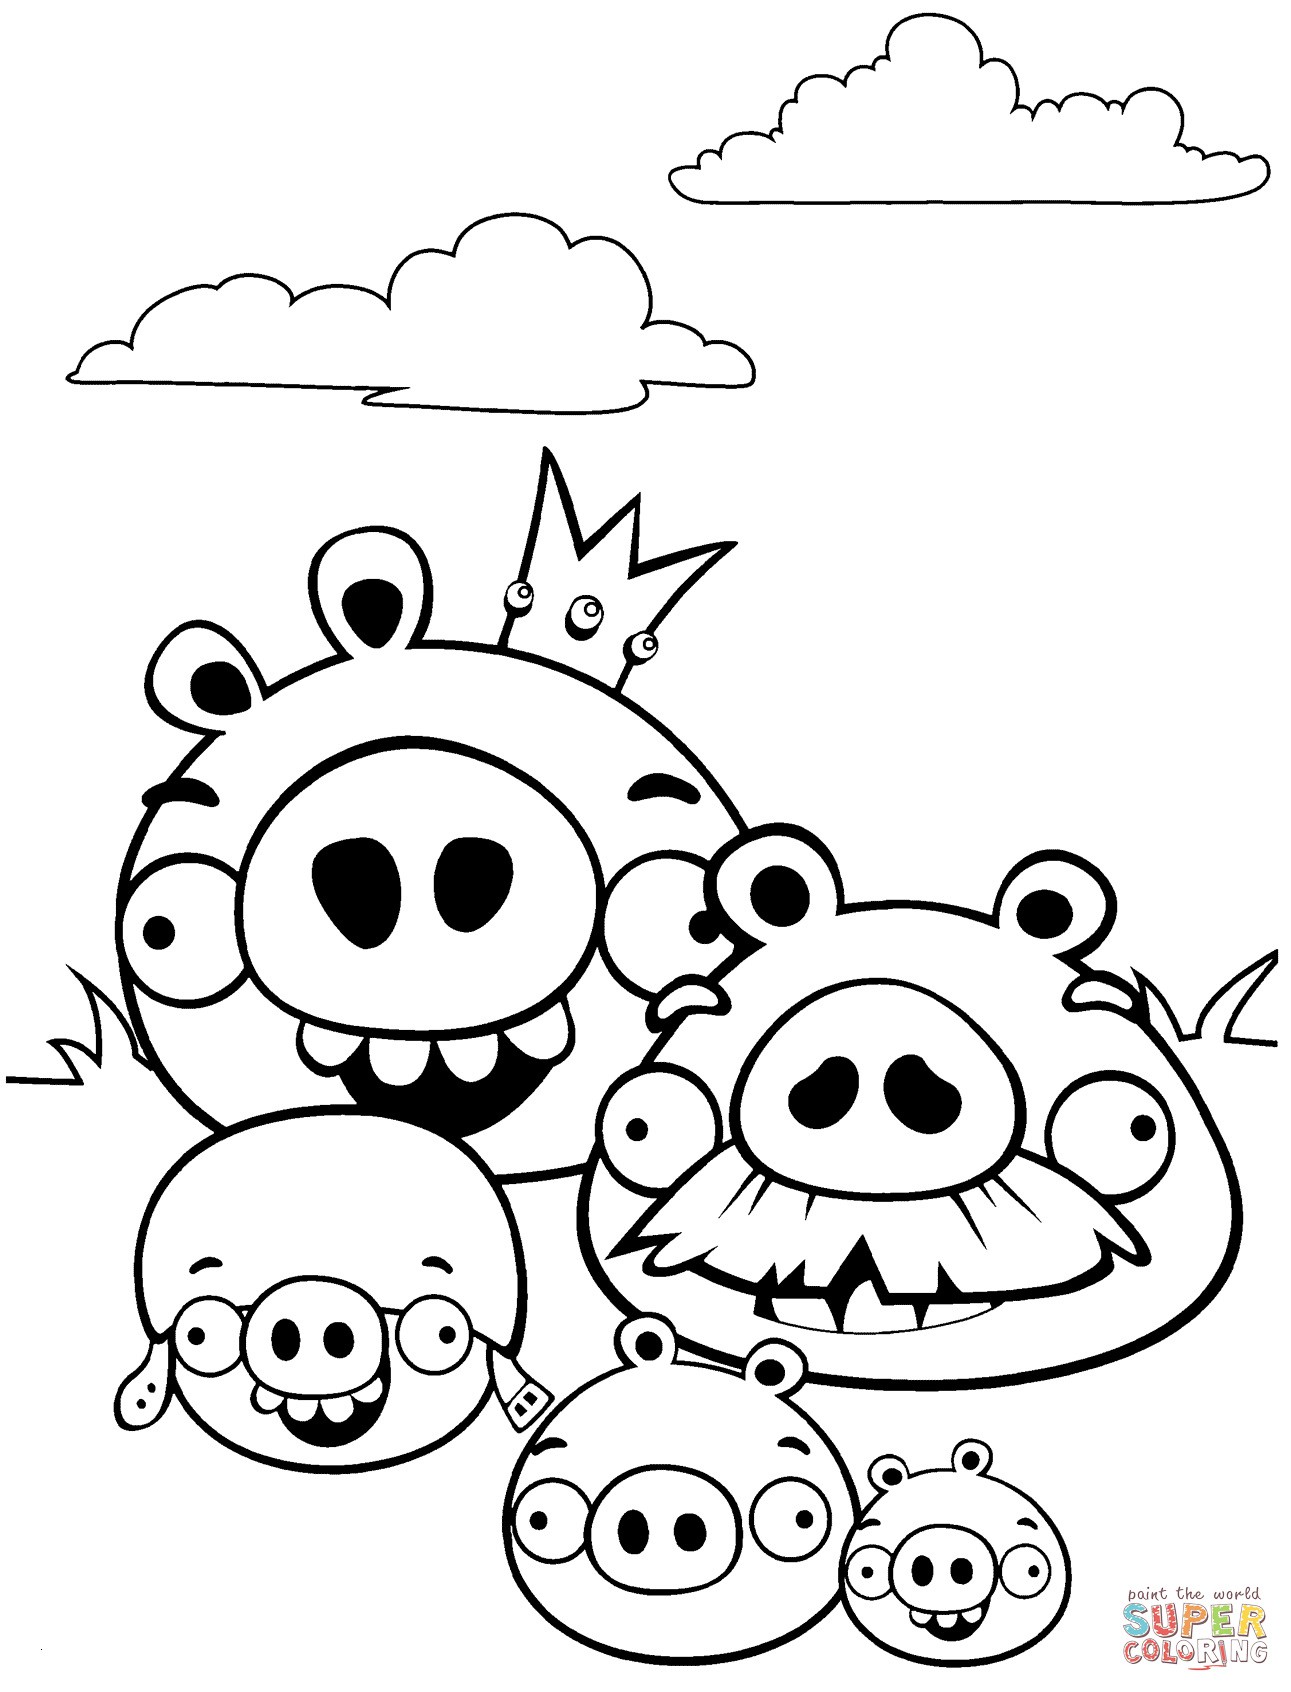 Bad Coloring Pages Luxury Bad Piggies Coloring Page Free Printable Coloring Pages